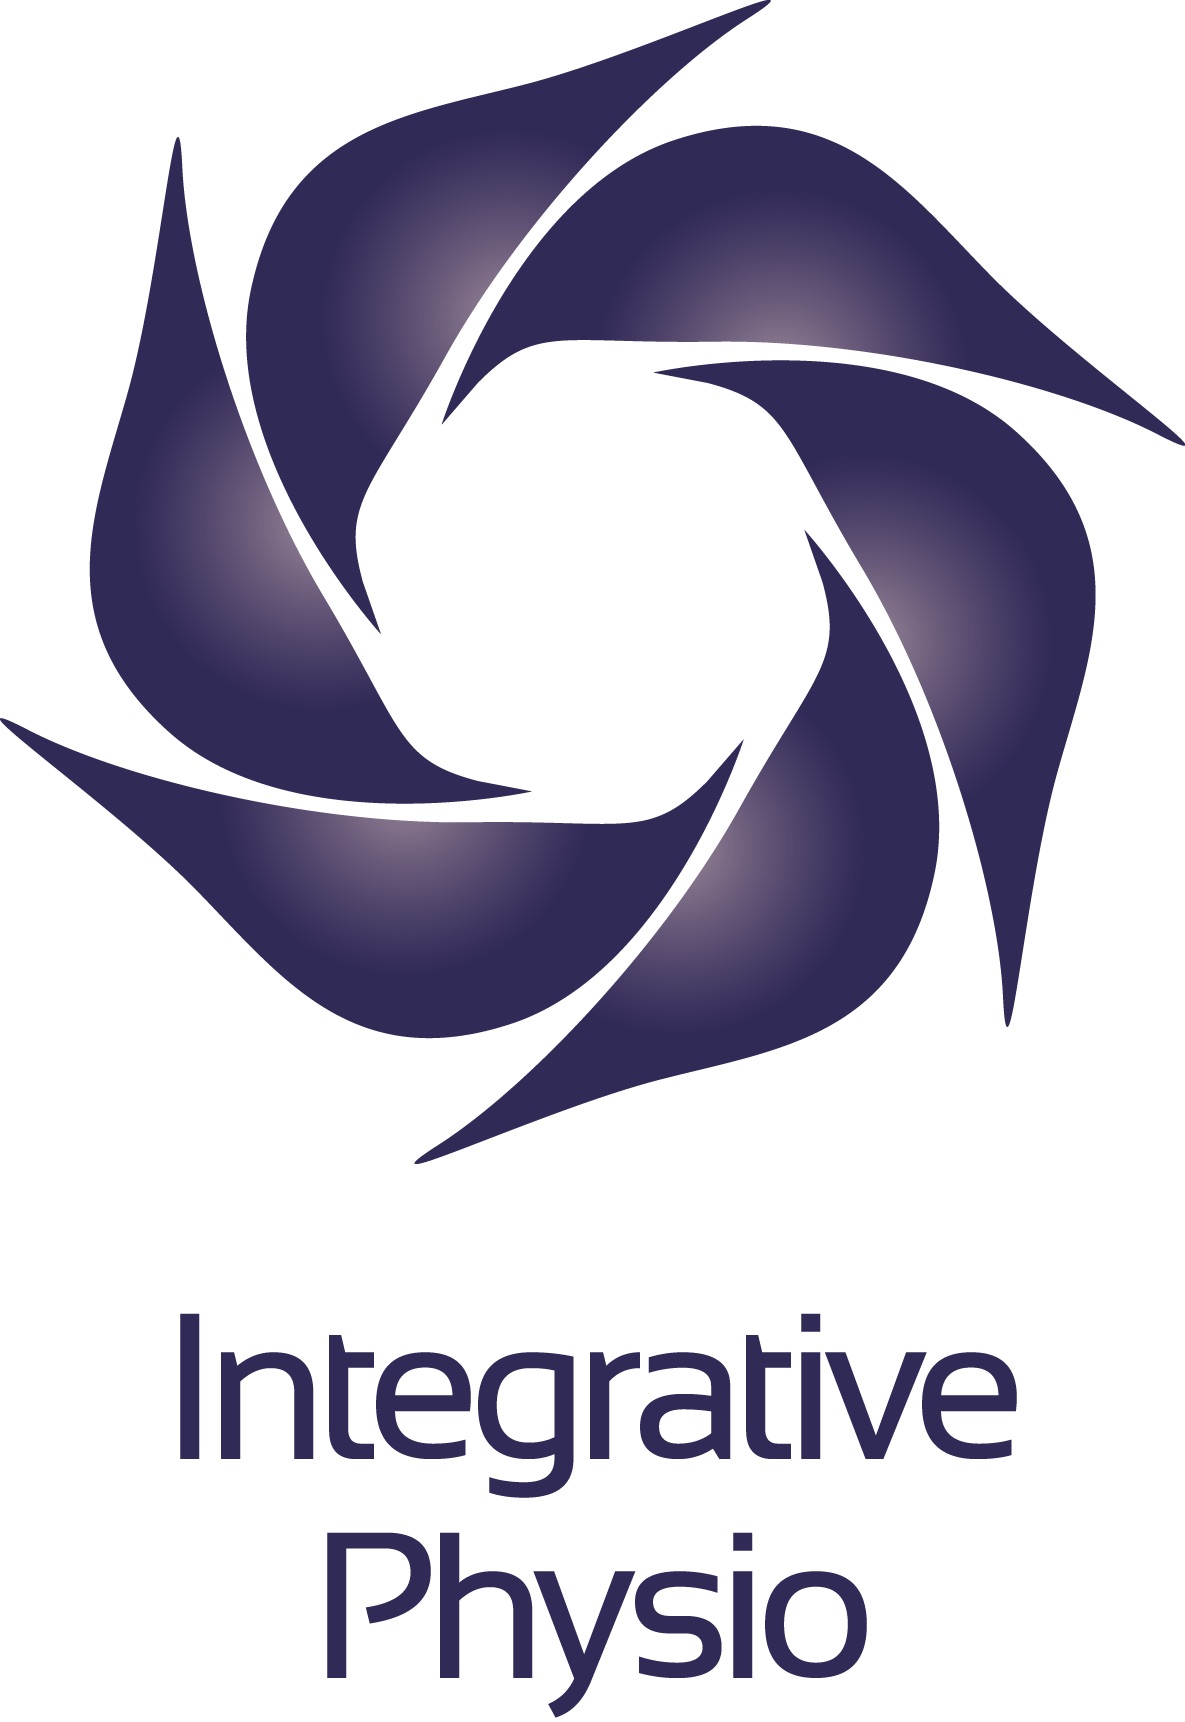 Image for Integrative Physio Pte Ltd